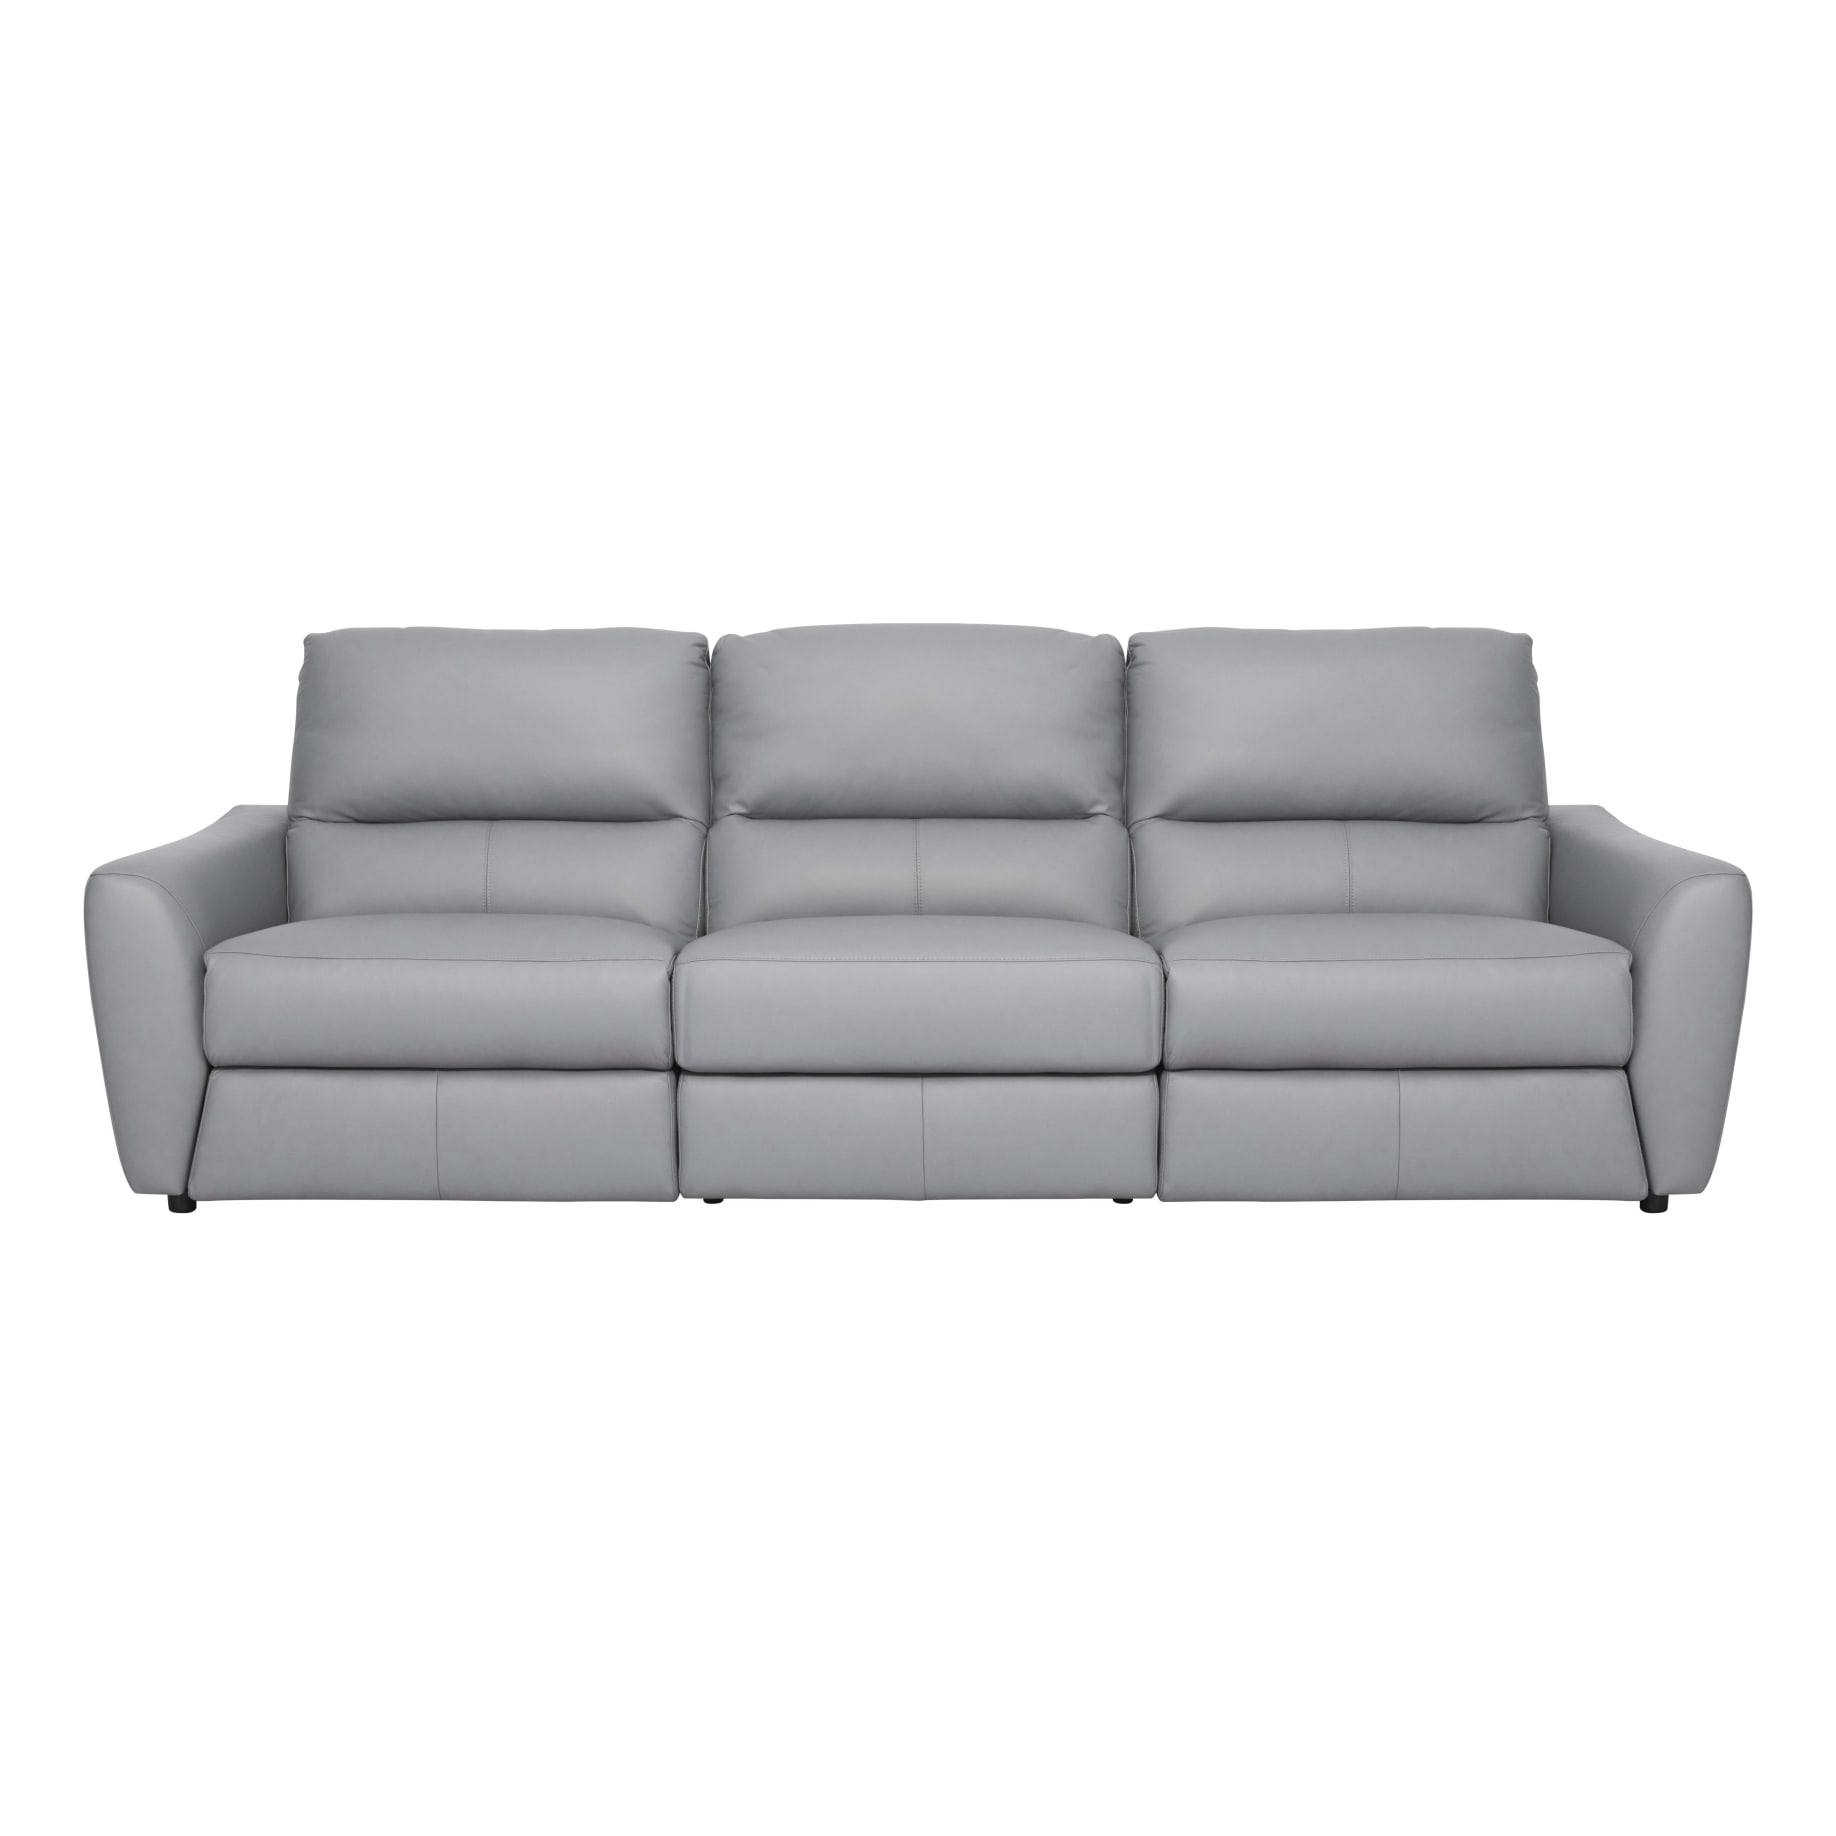 Portland 3 Seater with 2 Recliners in Pewter